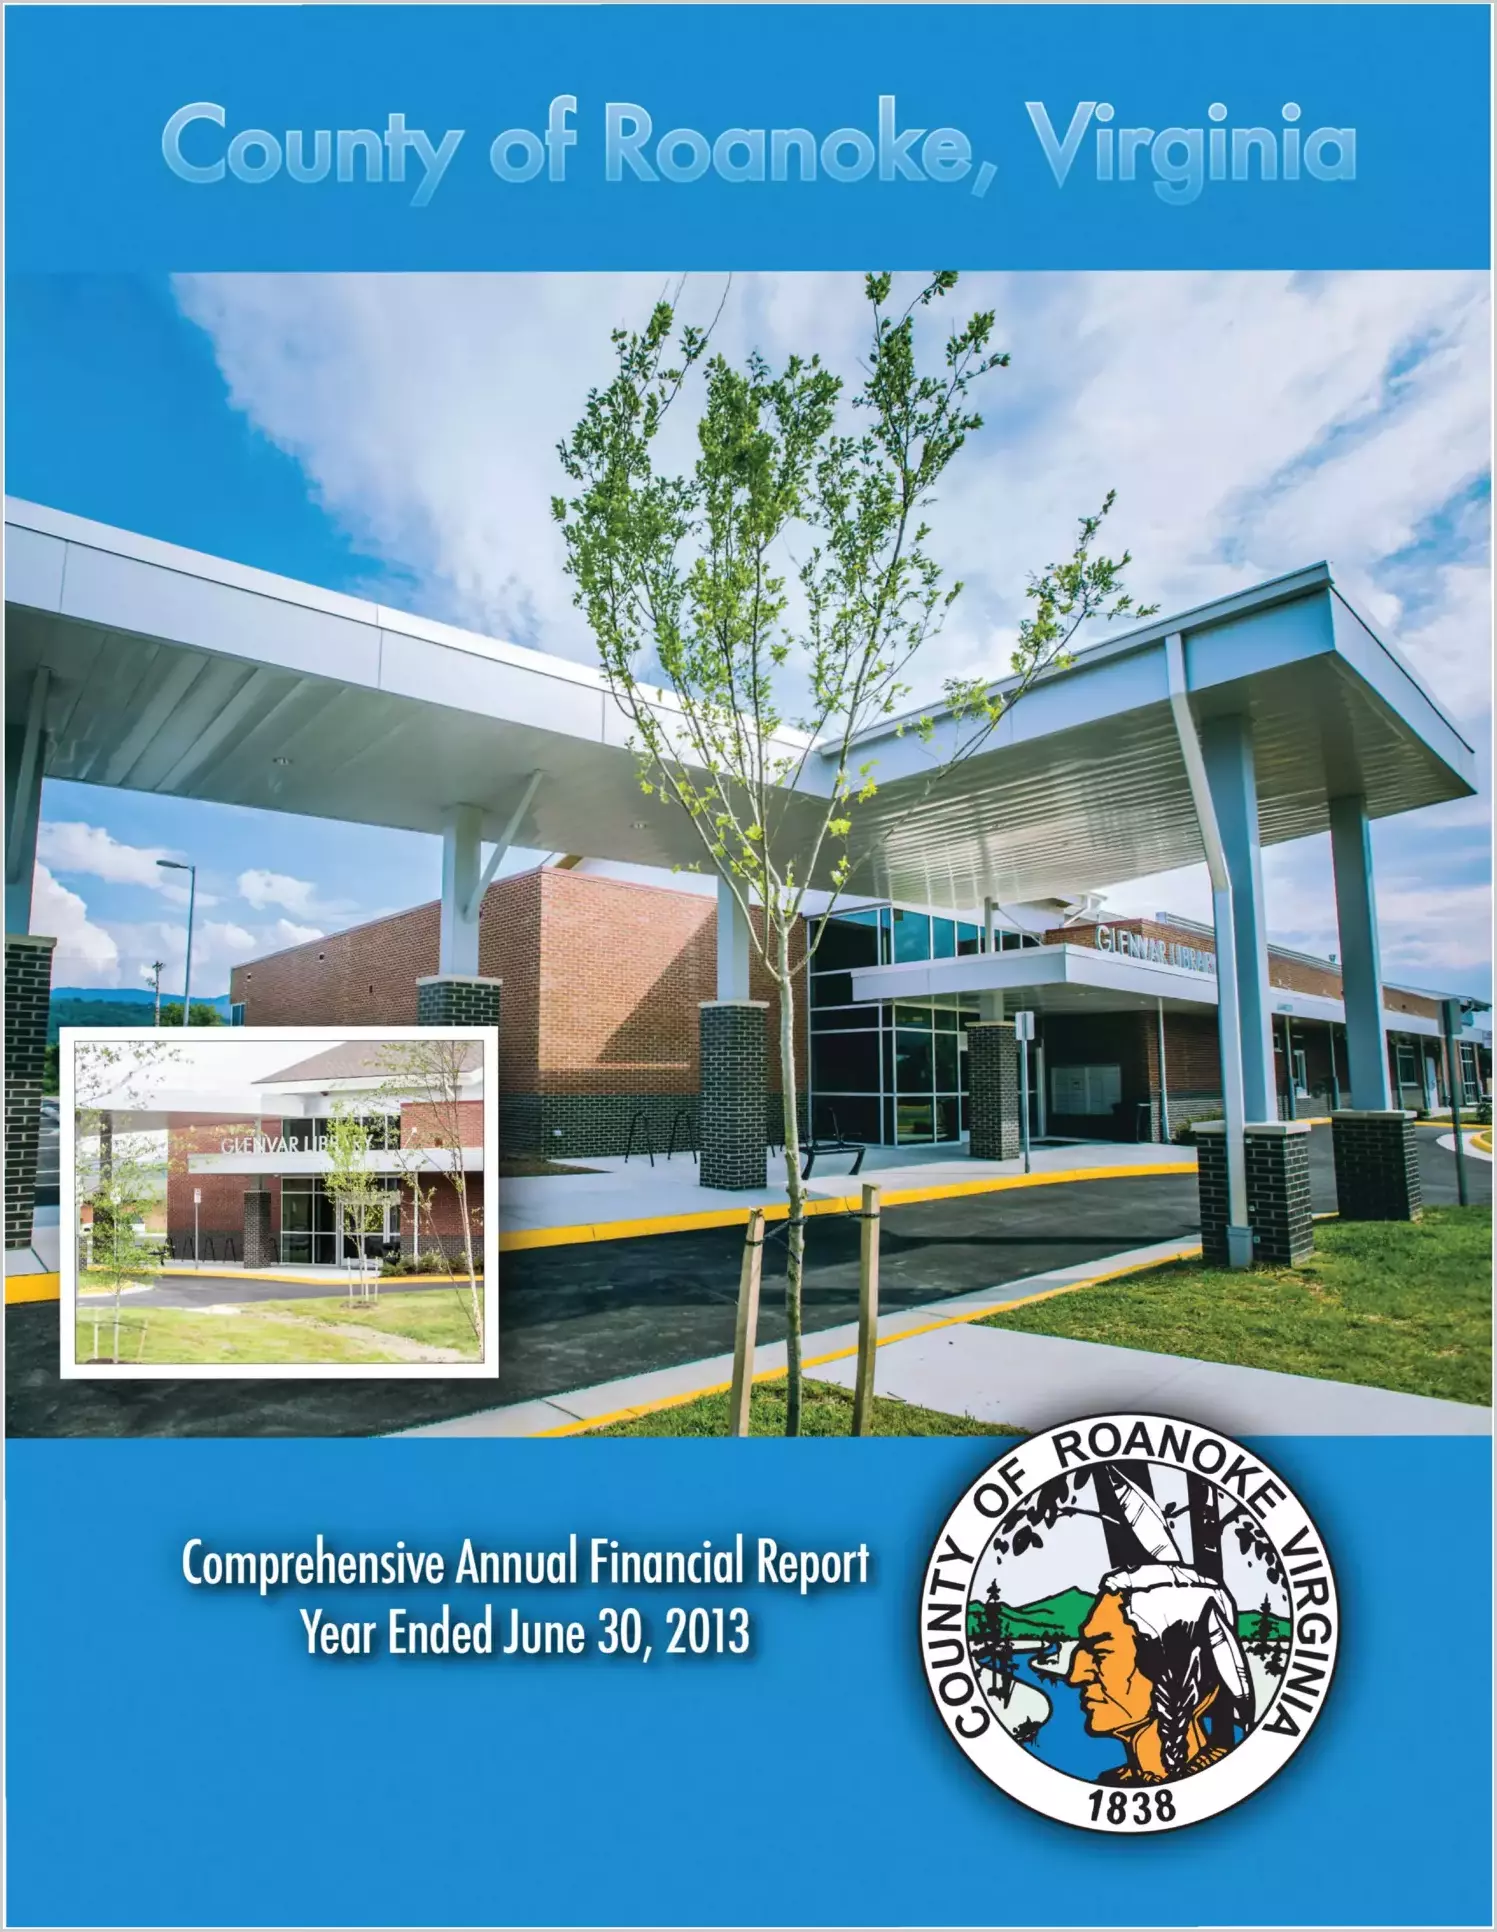 2013 Annual Financial Report for County of Roanoke